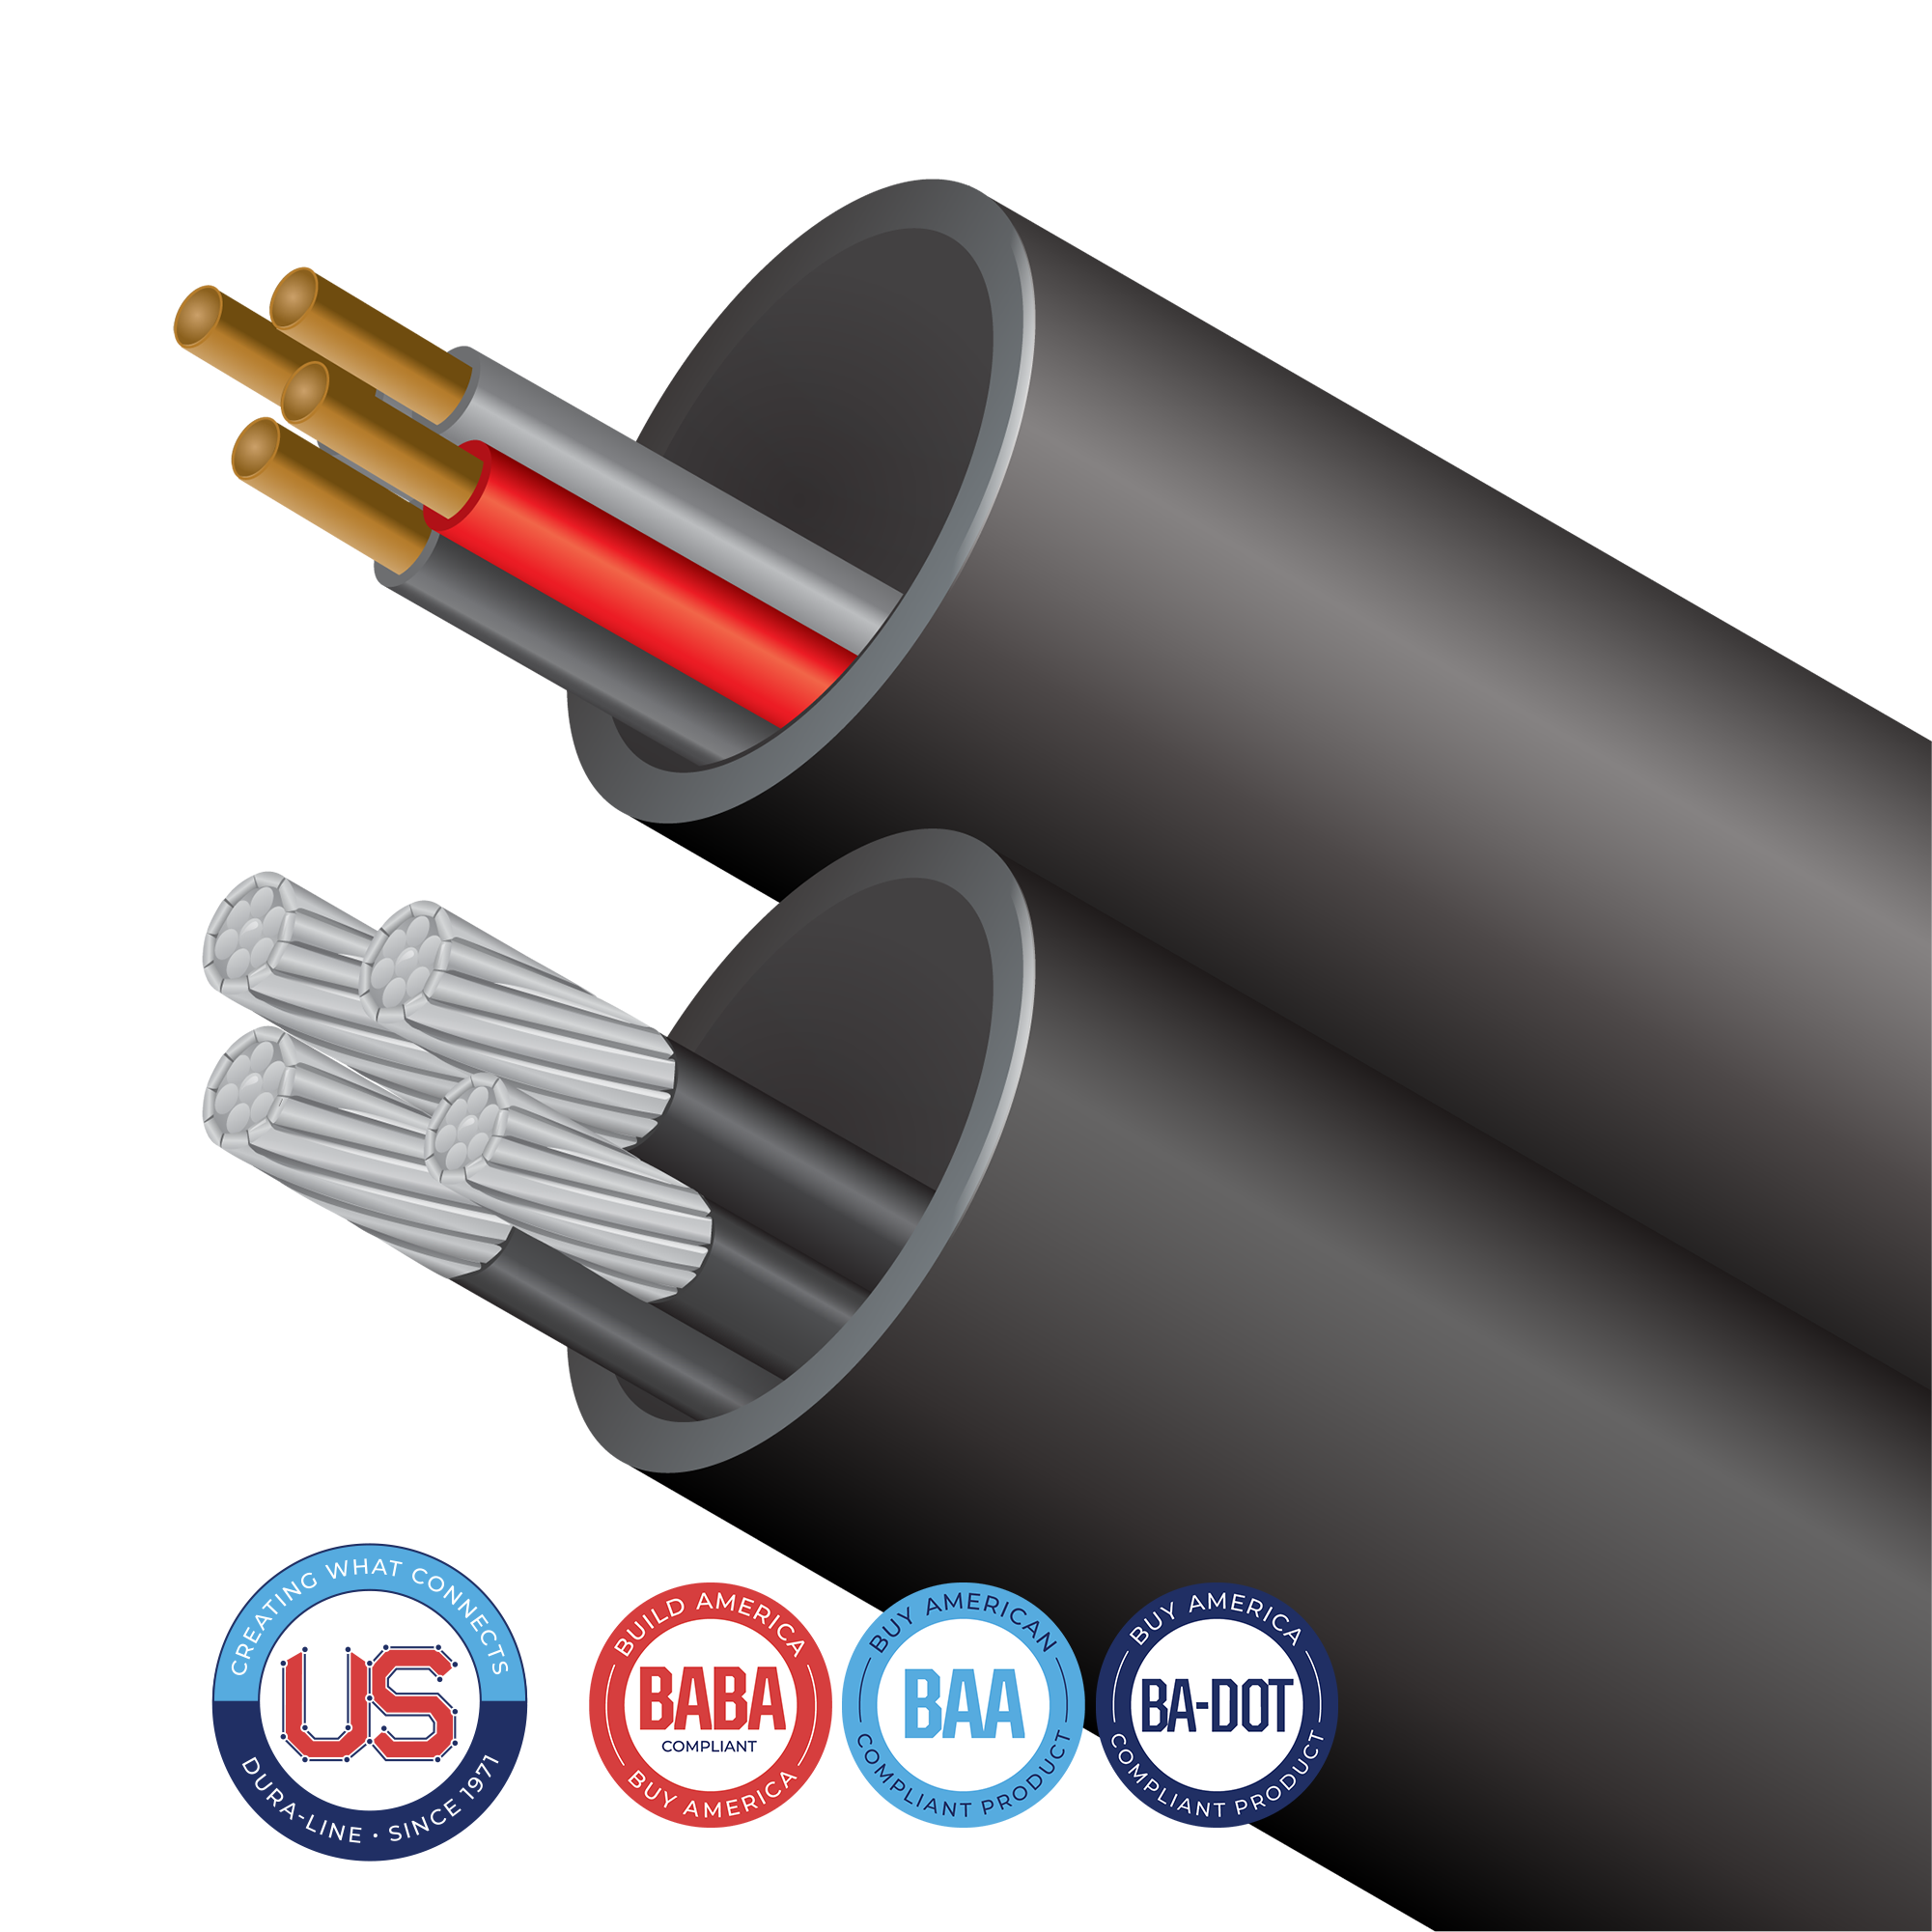 With Cable-in-Conduit (CIC), your choice of cable is factory pre-installed allowing for one-step placement of conduit and cable. 